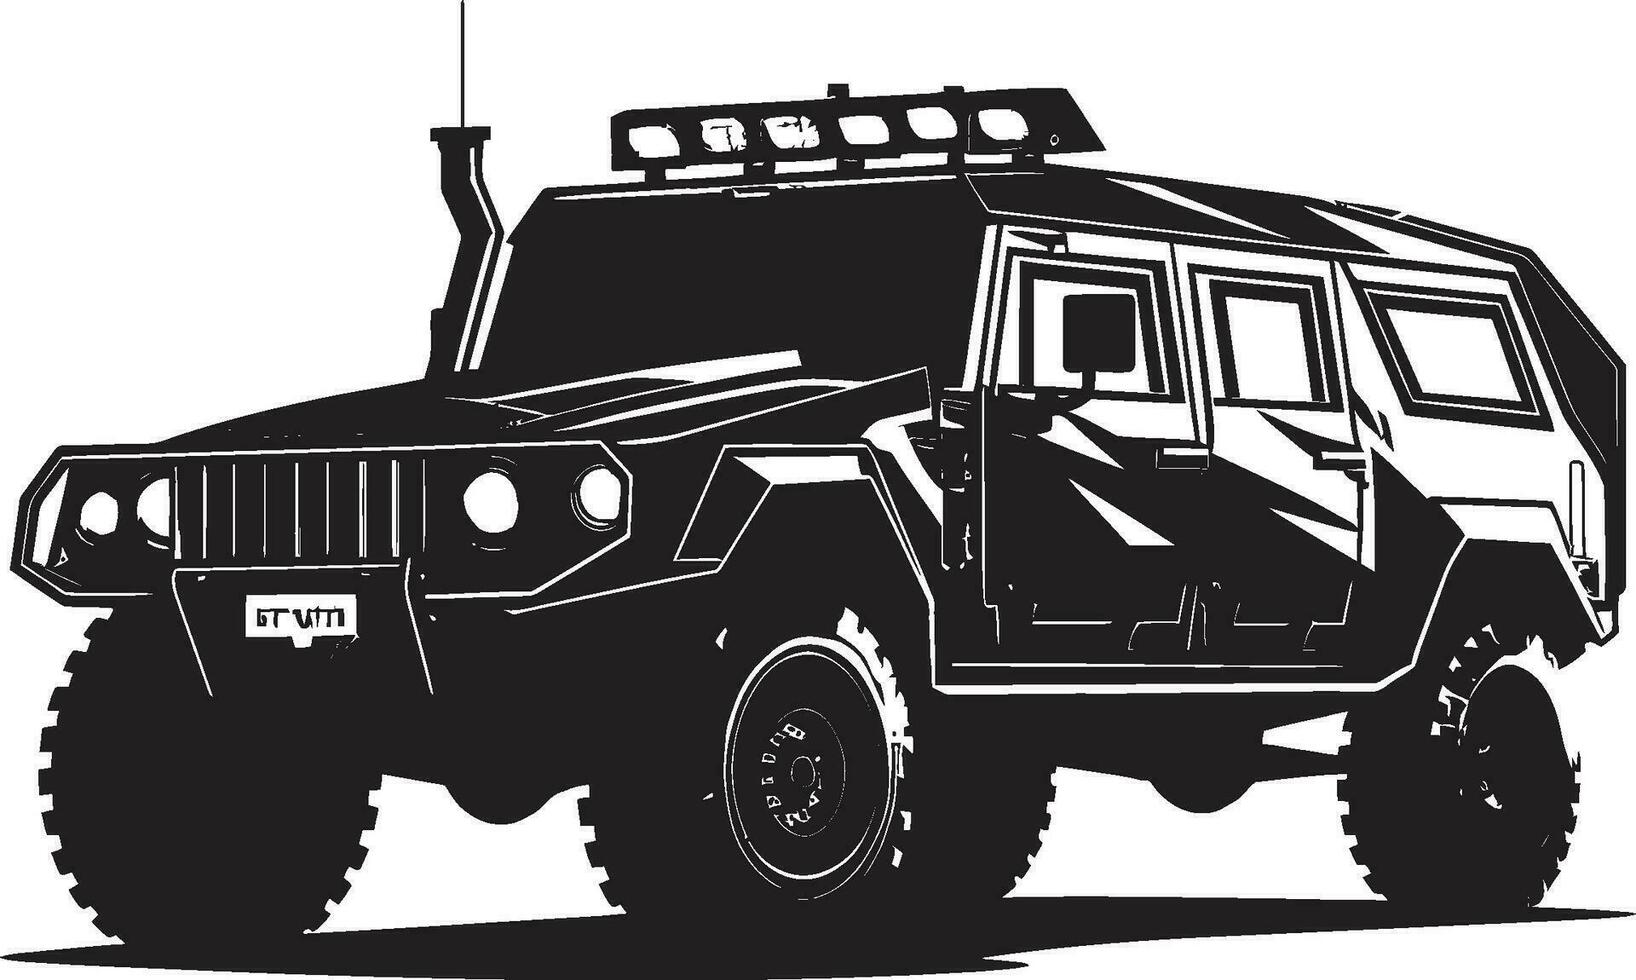 Warrior s Ride Army 4x4 Emblematic Icon Guardian Rover Black Army Transport Logo vector